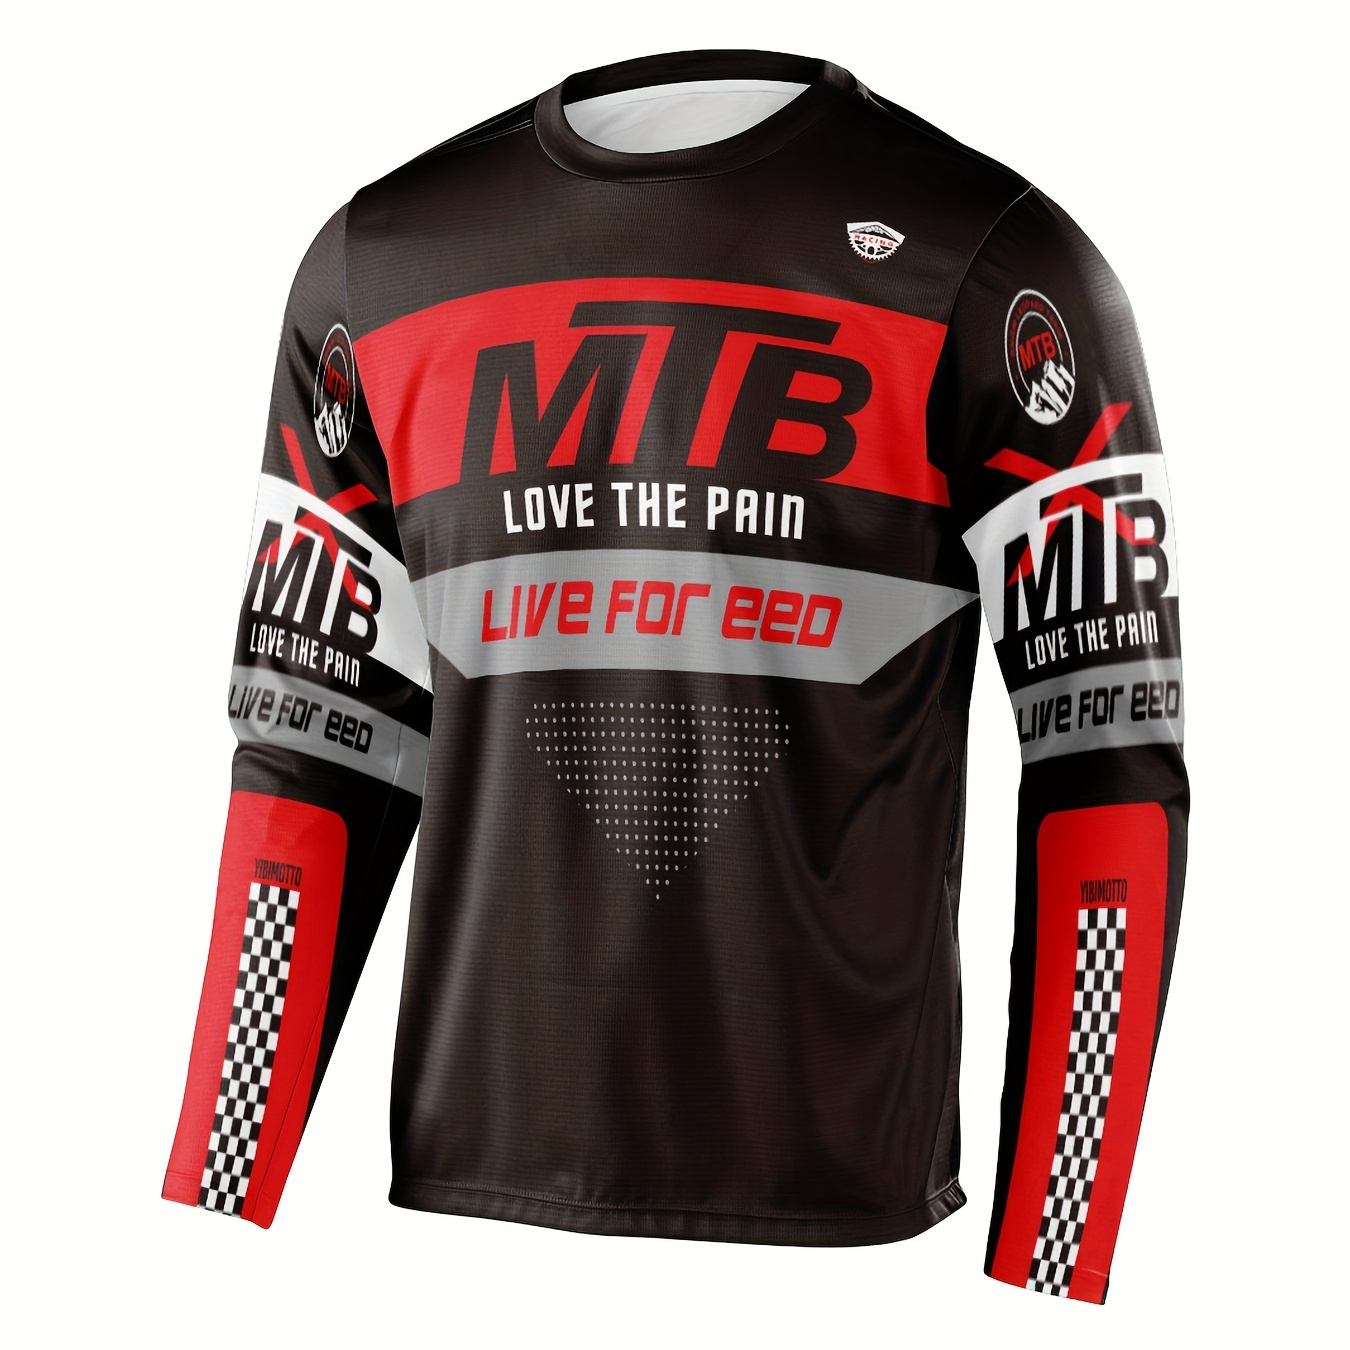 

Men's Letters Print Cycling Jersey, Active Breathable Moisture Wicking Long Sleeve Crew Neck Shirt For Biking Riding Sports